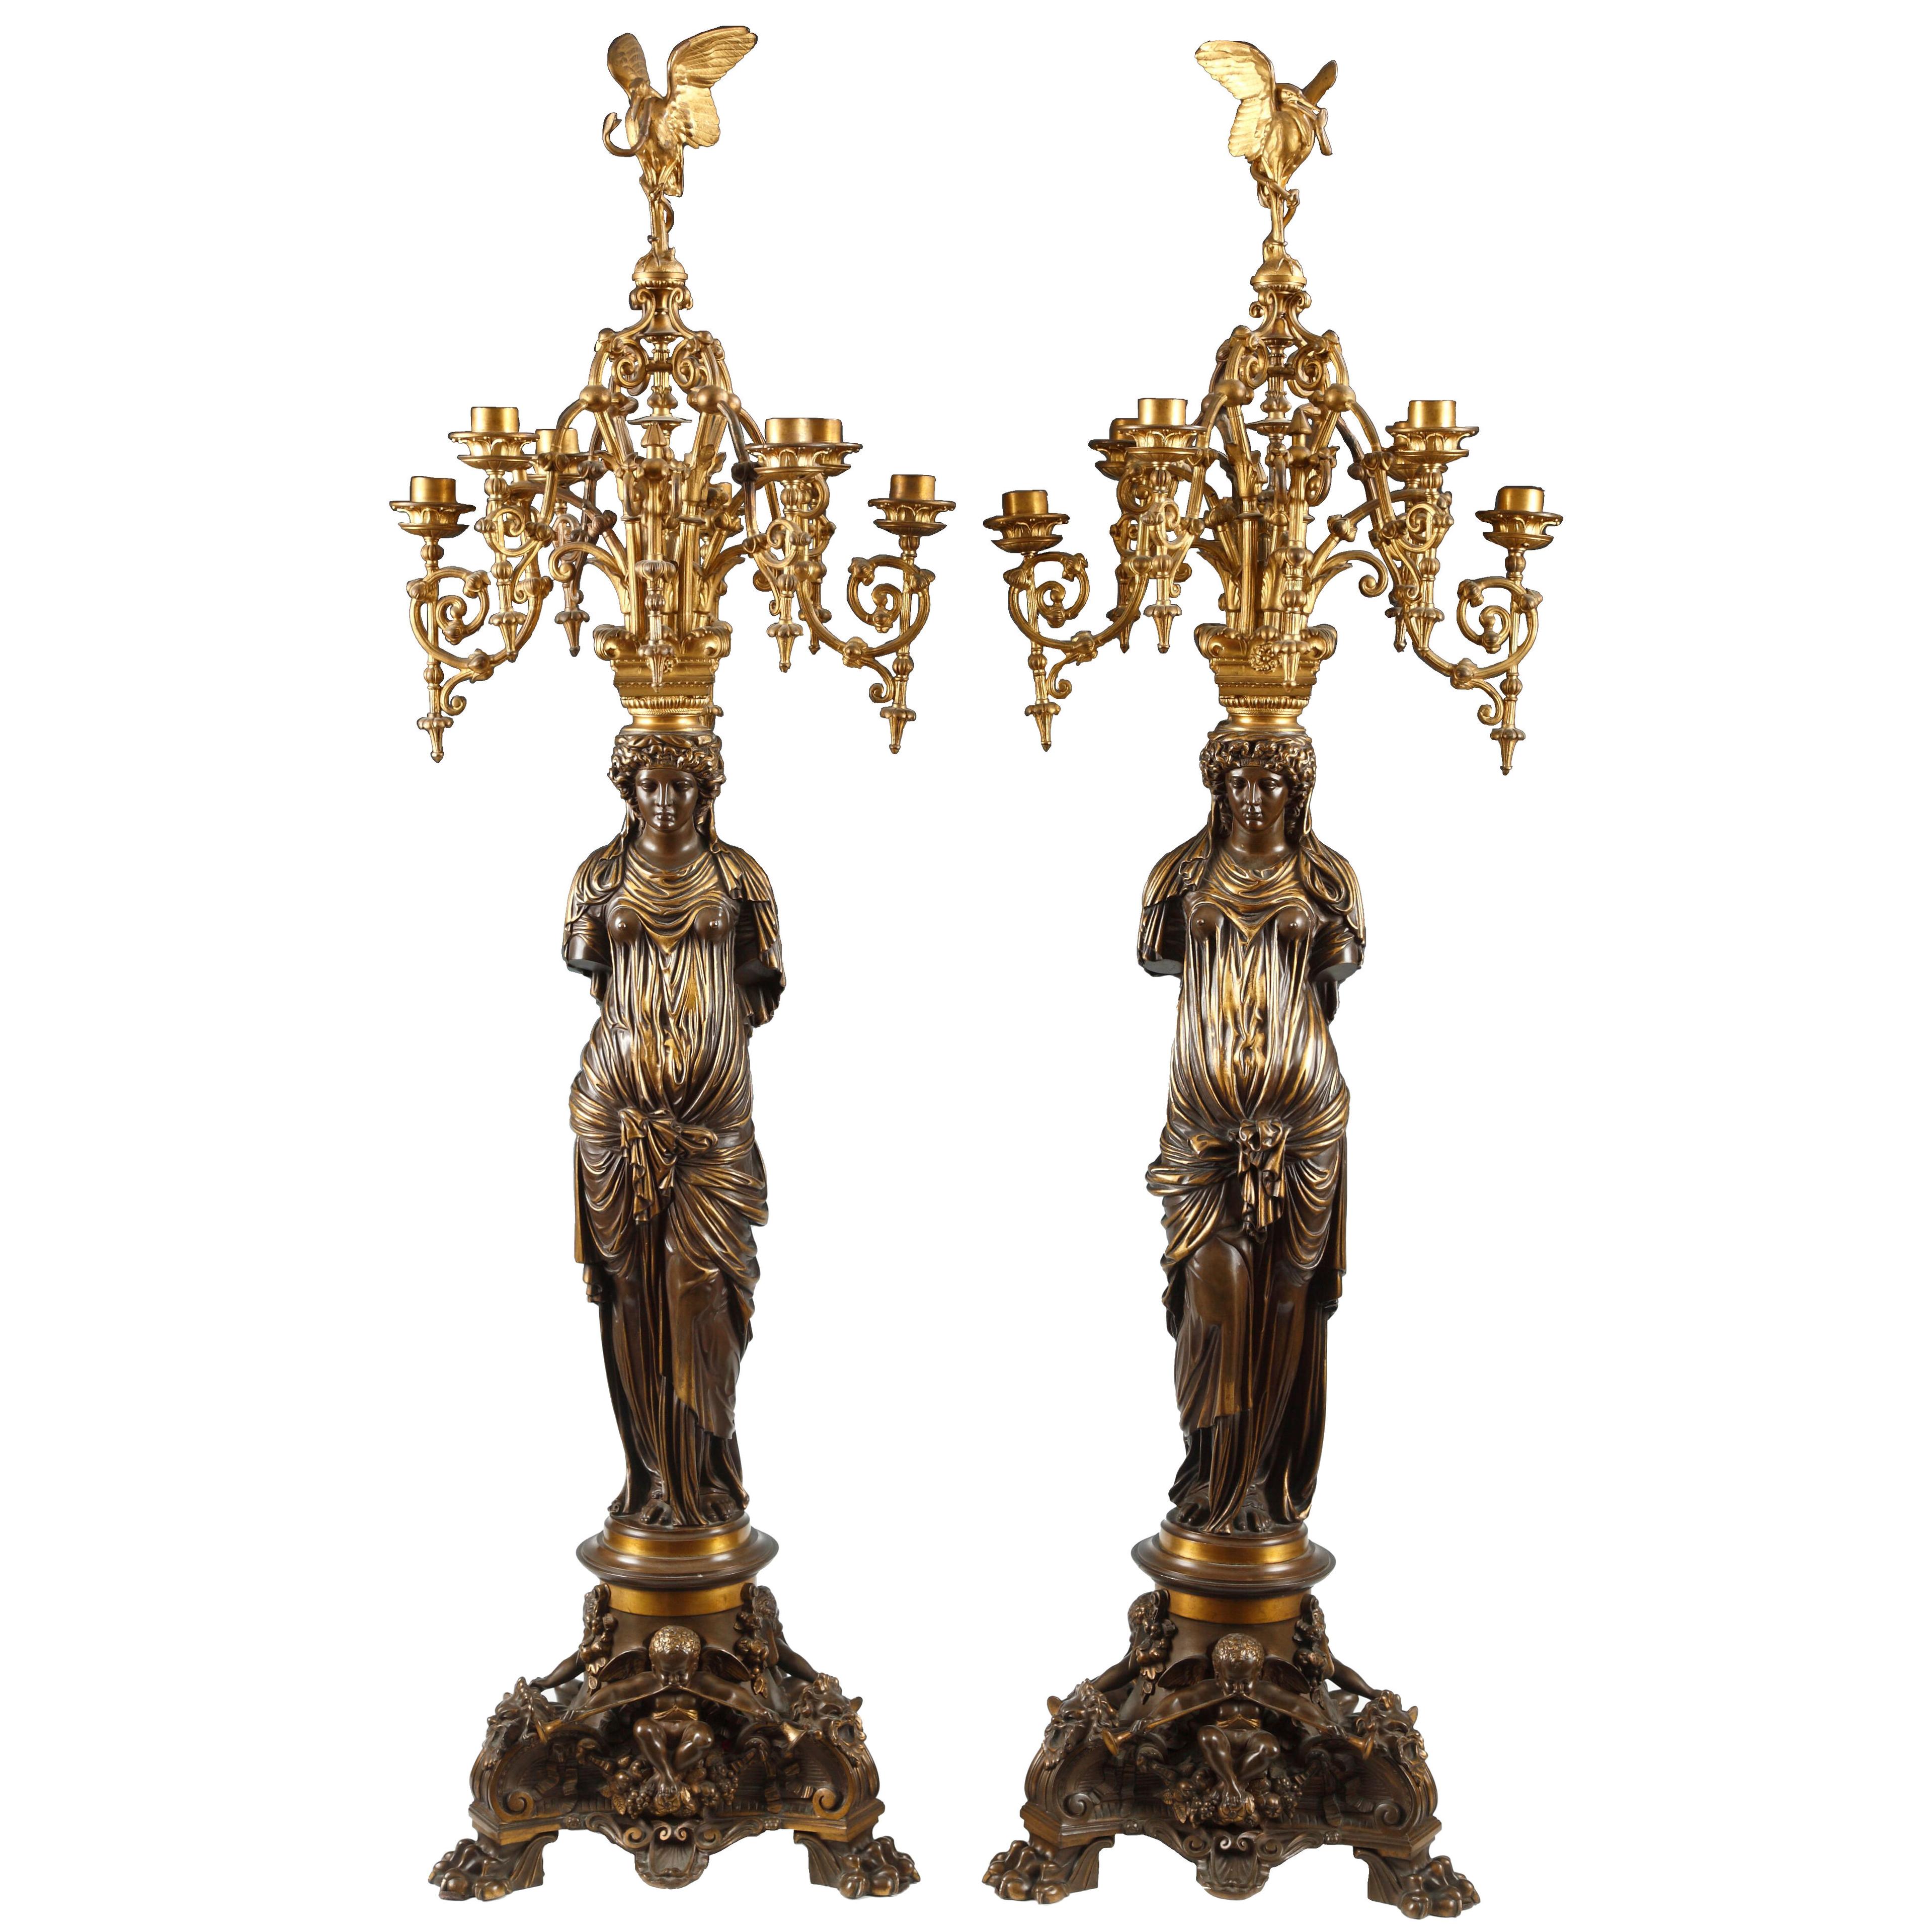 Pair of Neo-Greek Candelabras by L.C. Sévin & F. Barbedienne, France, Circa 1878